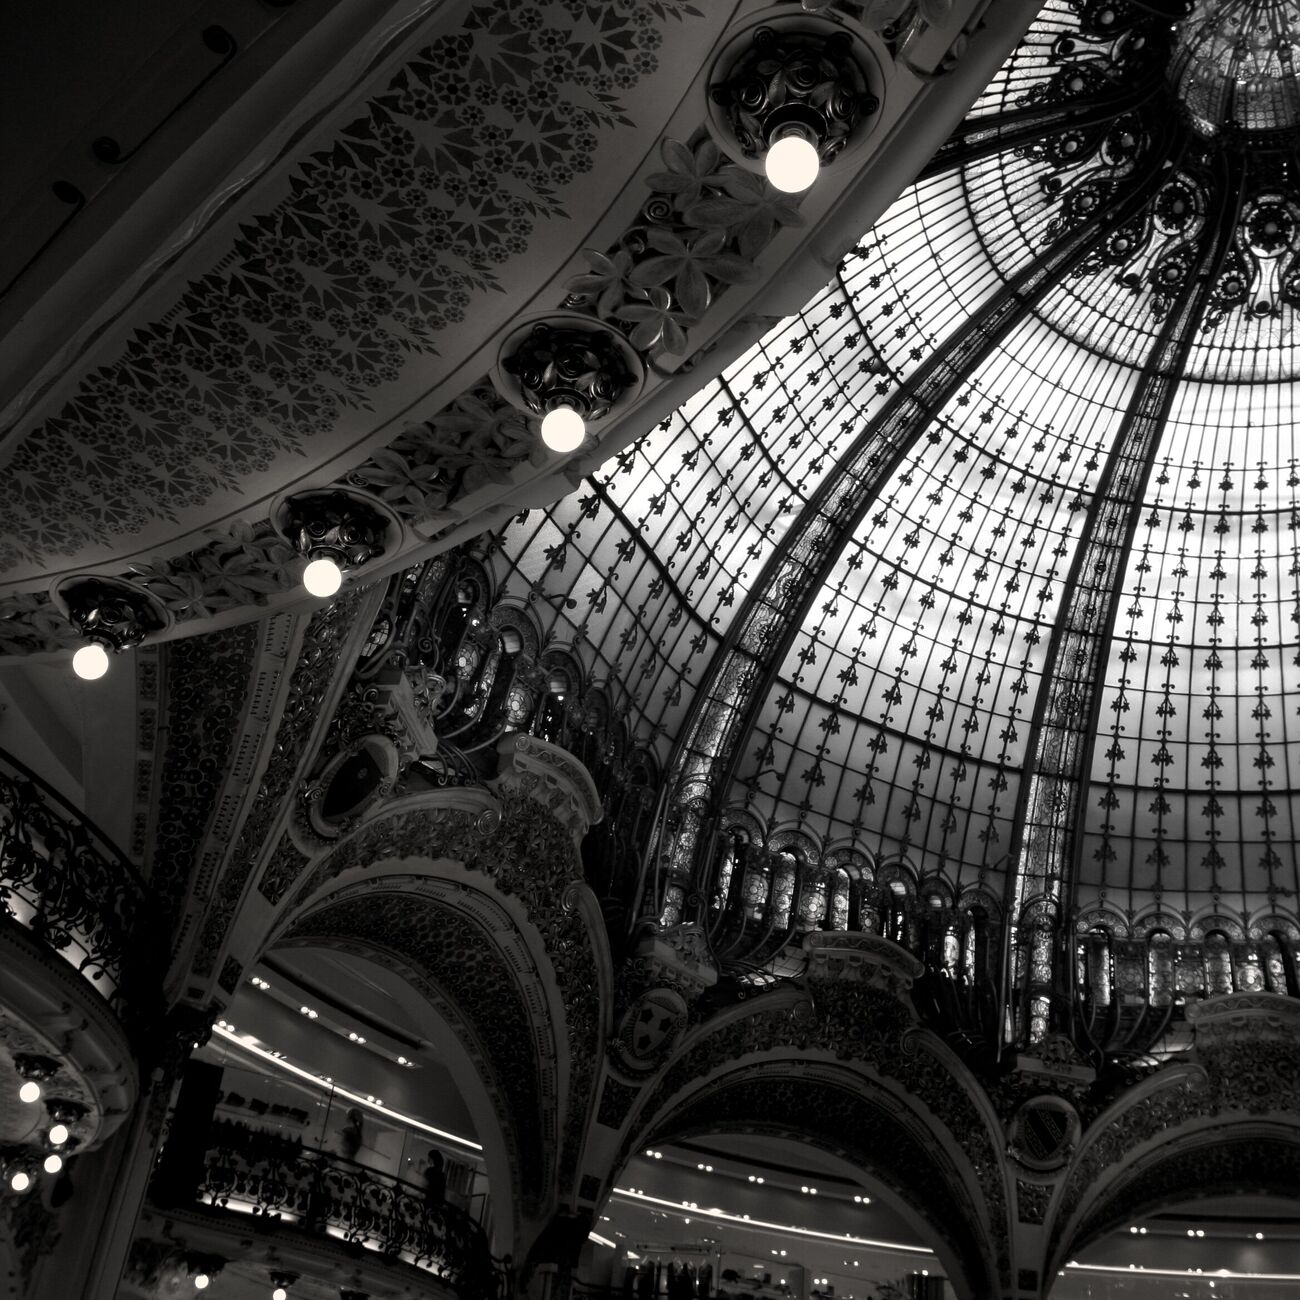 Get a 7.1 x 7.1 in, Galeries Lafayette. Ref-545-23 - Denis Olivier Art Photography